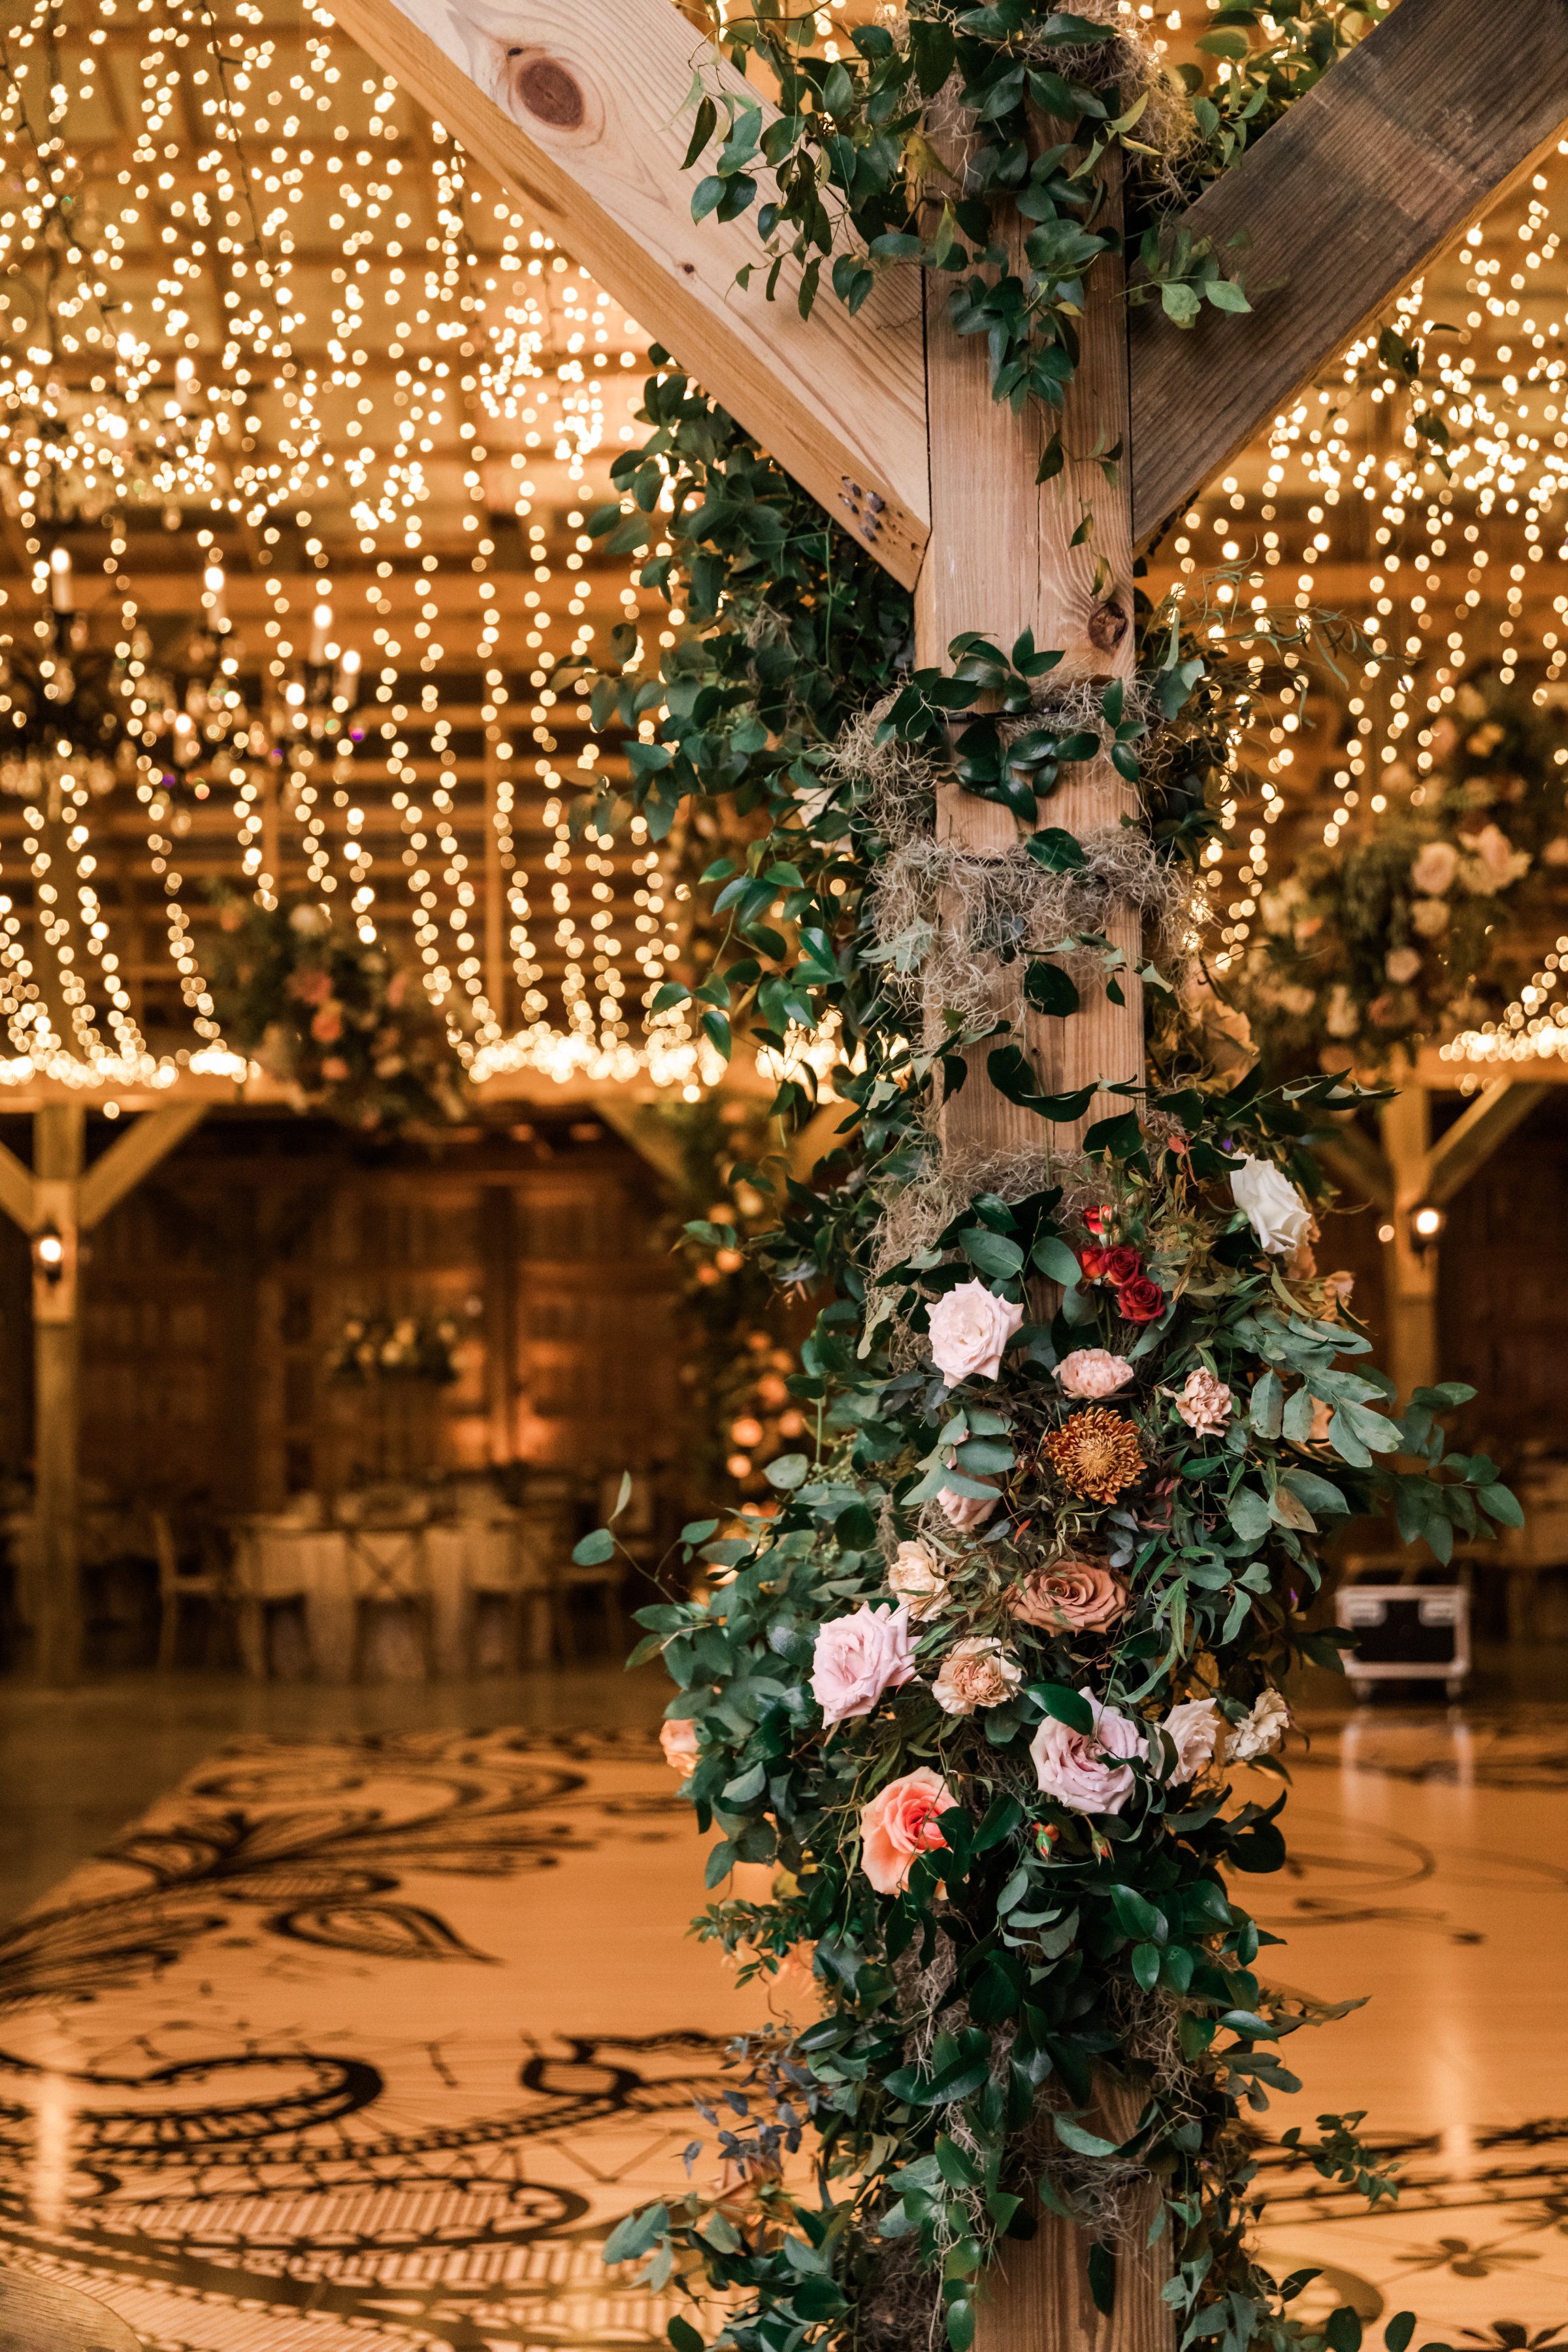 Climbing barn pole floral installations add pops of terra cotta, blush pink, and copper hues throughout the reception. Fall florals featuring garden roses and dahlias. Designed by Rosemary and Finch in Nashville, TN.